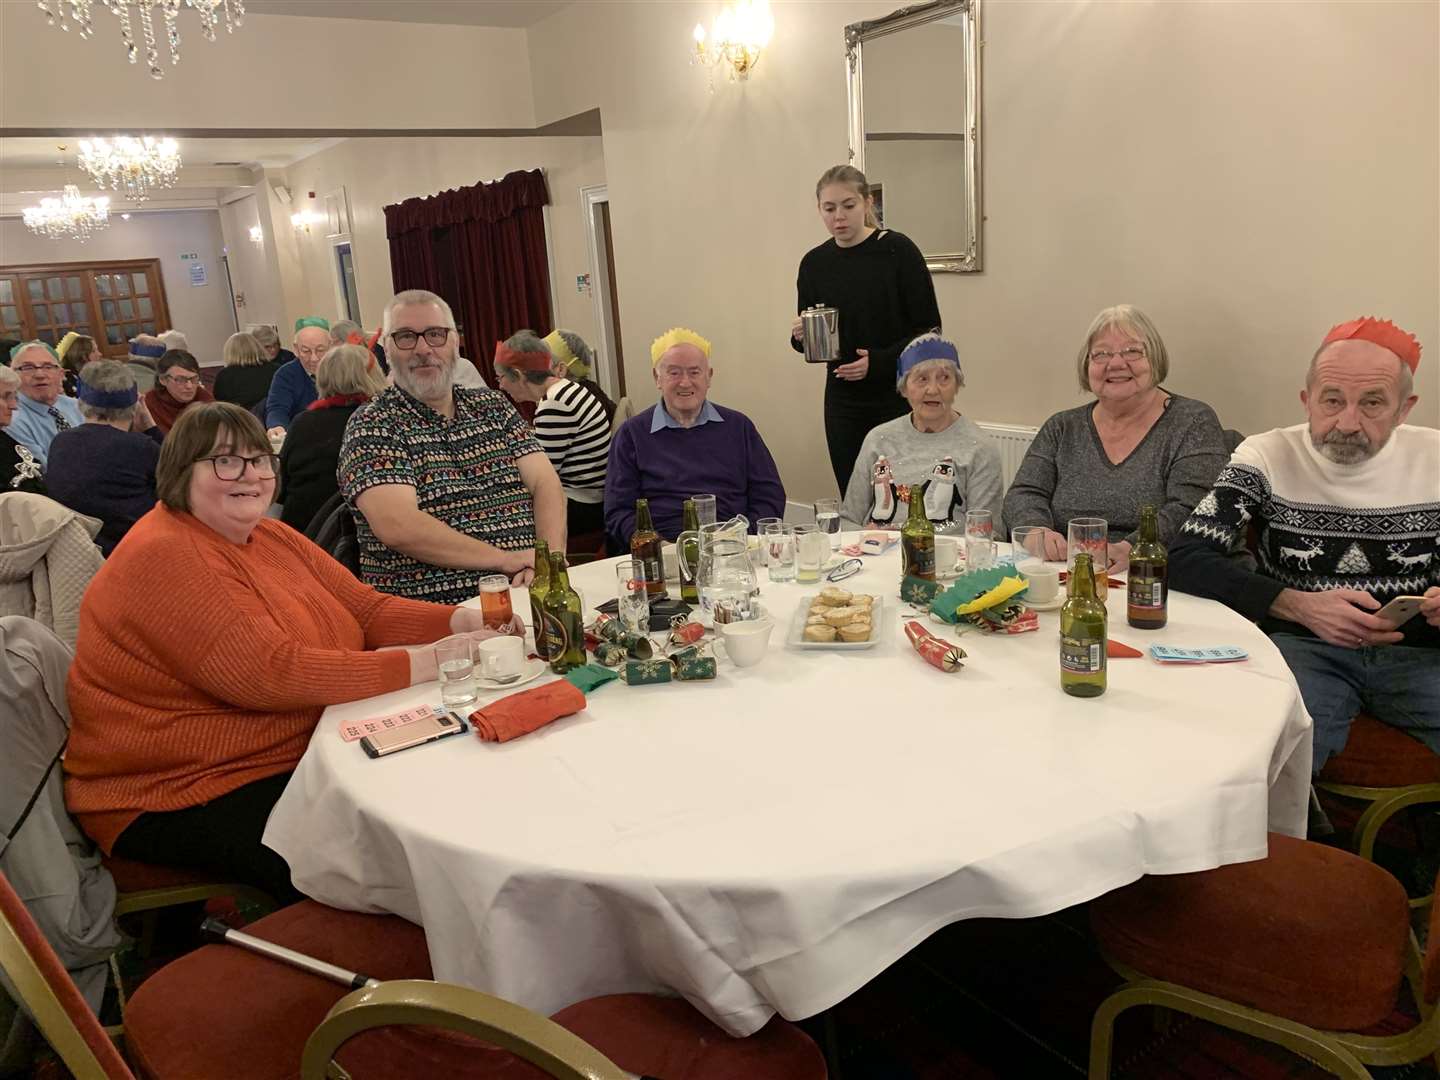 One of the happy groups at last week's Age Concern Christmas party at Kintore Arms, High Street, Inverurie